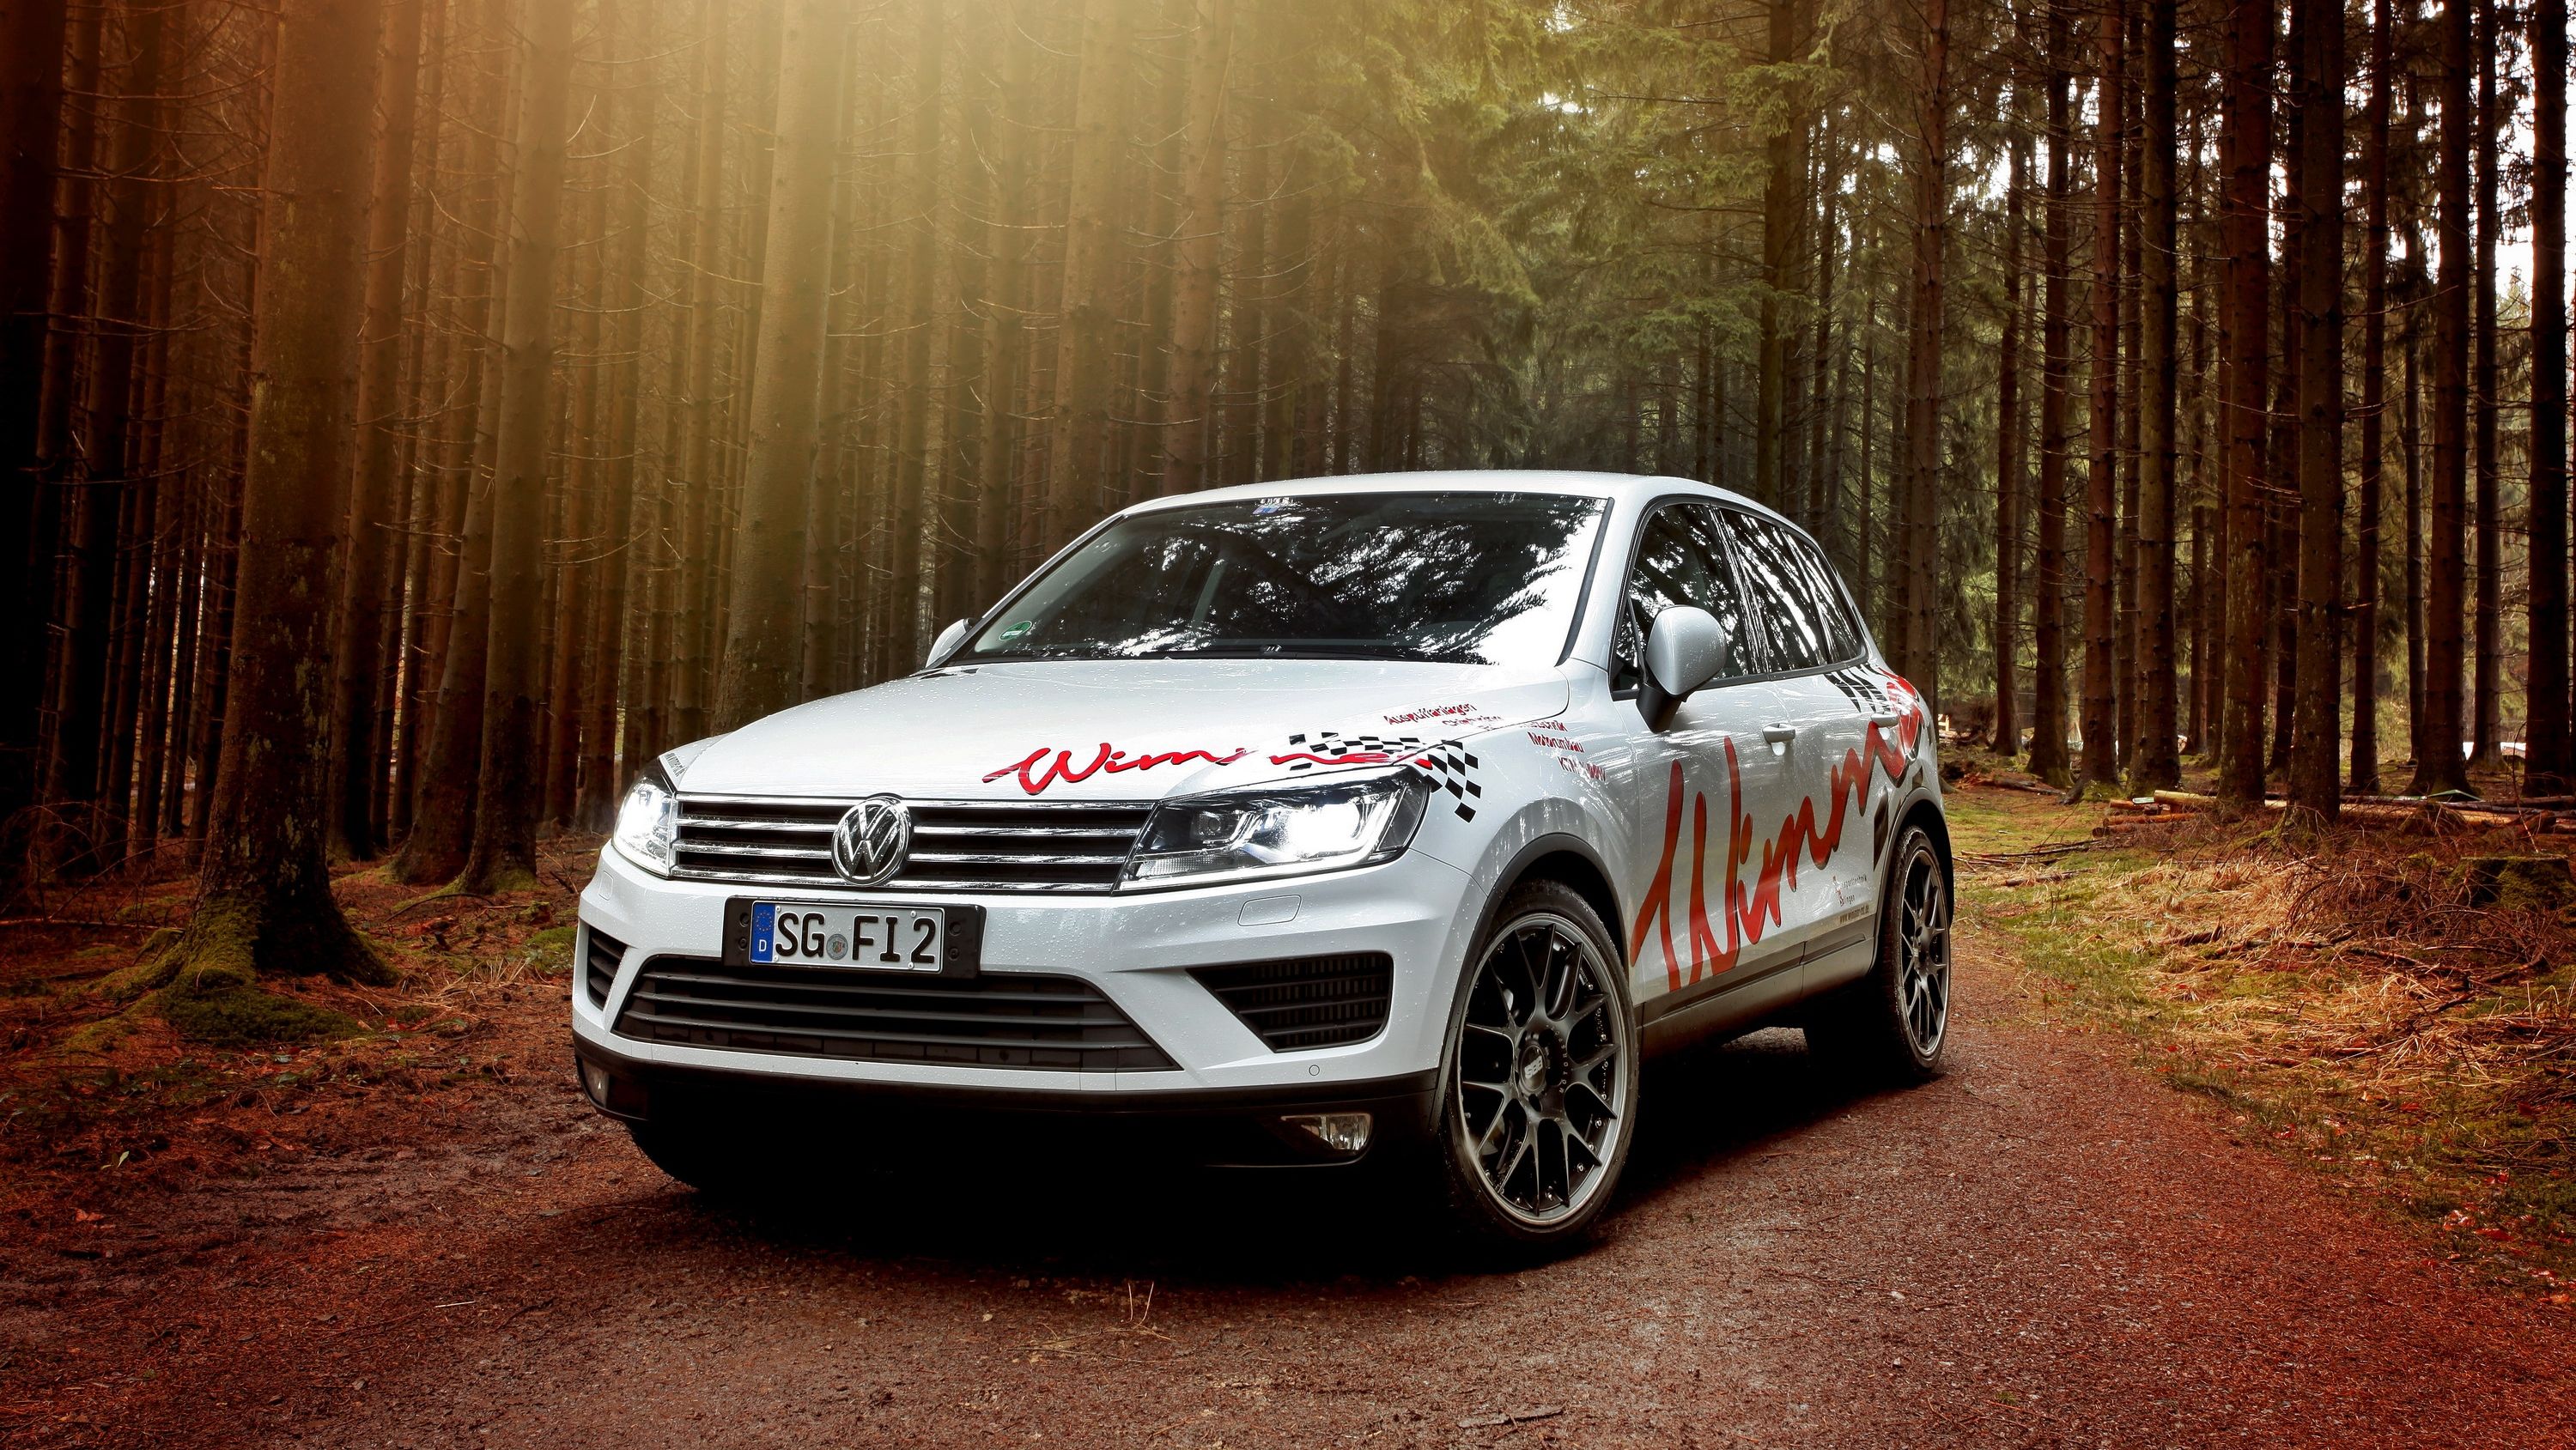 2016 Volkswagen Touareg by Wimmer RS